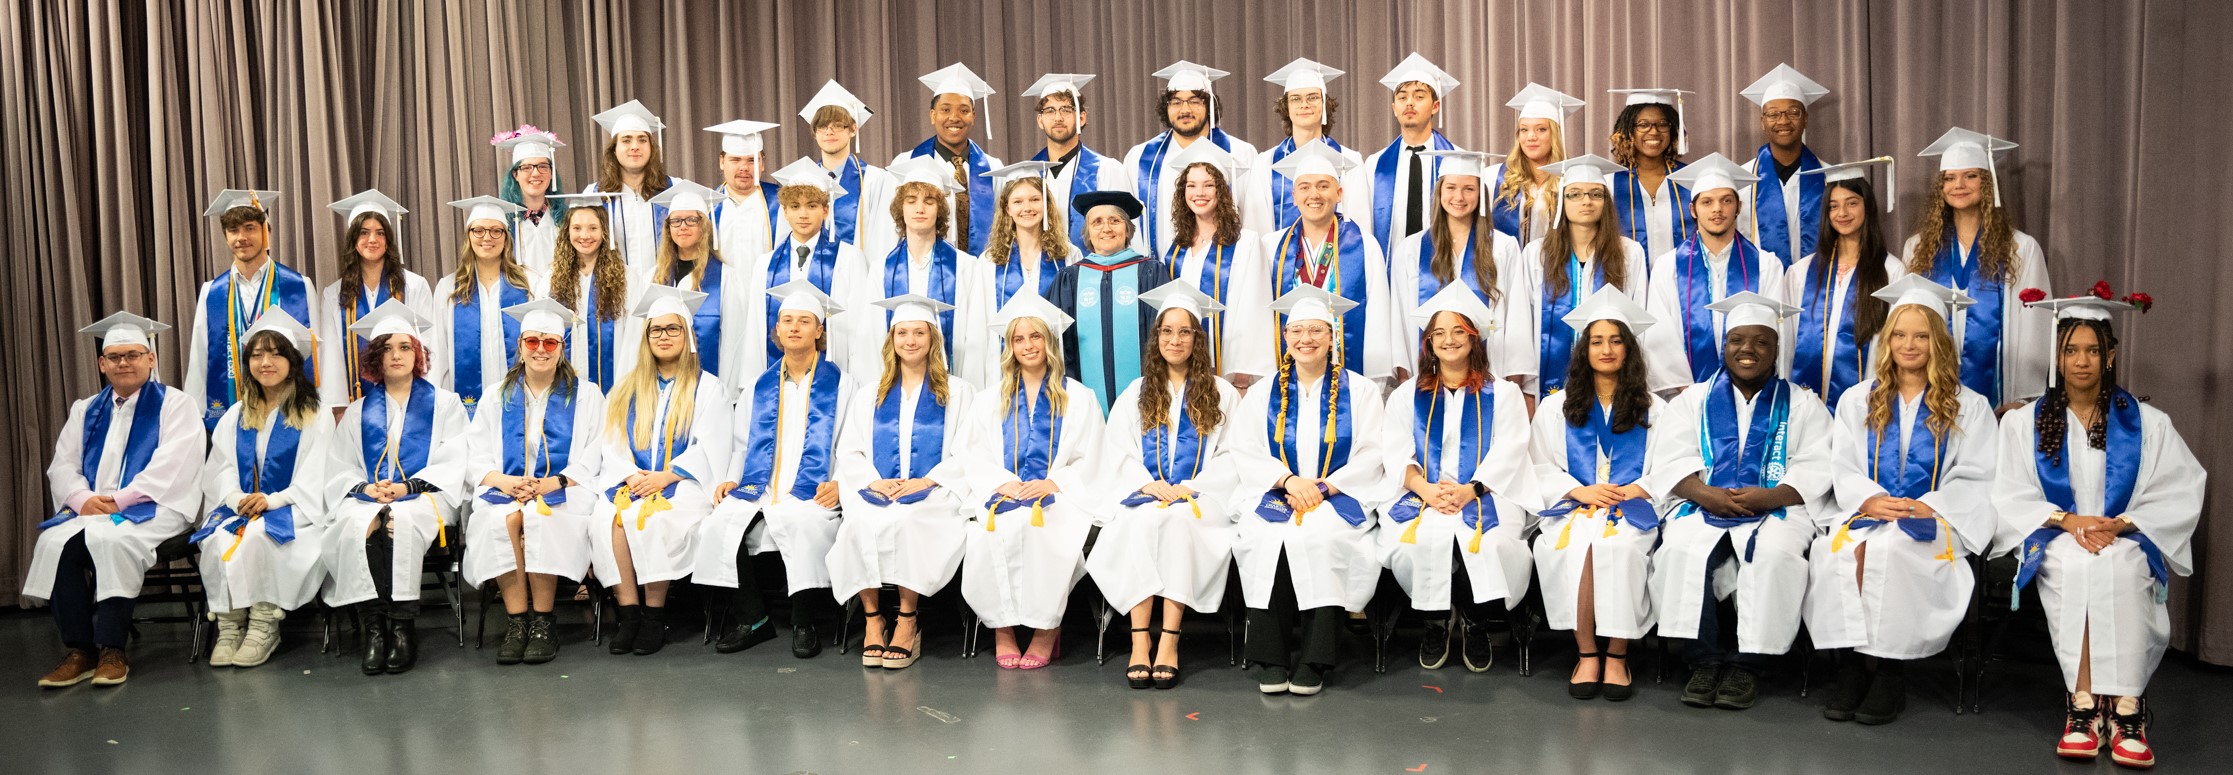 decorative image of CA-2024-MAIN , 44 seniors graduate from PSC Charter Academy on May 13 2024-05-16 08:49:27